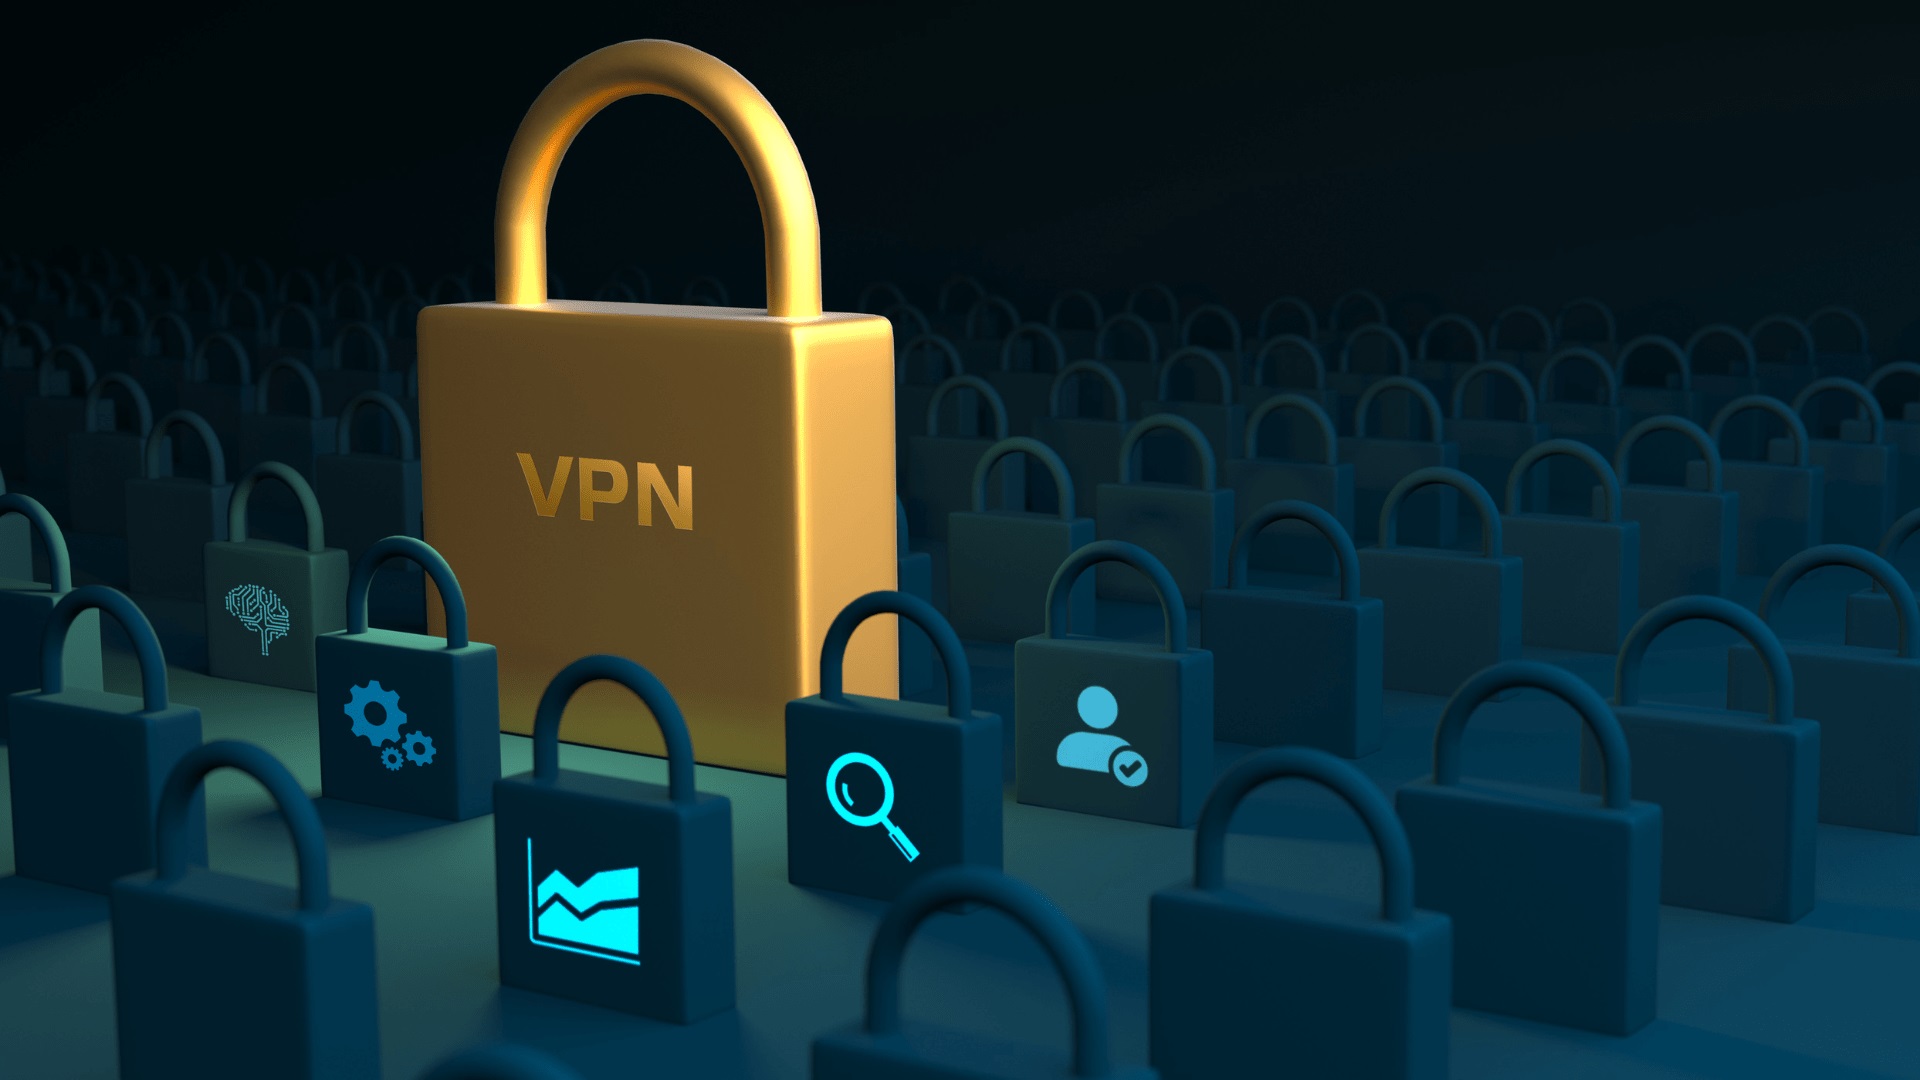 Spectrum VPN: Enhancing Your Online Security And Privacy